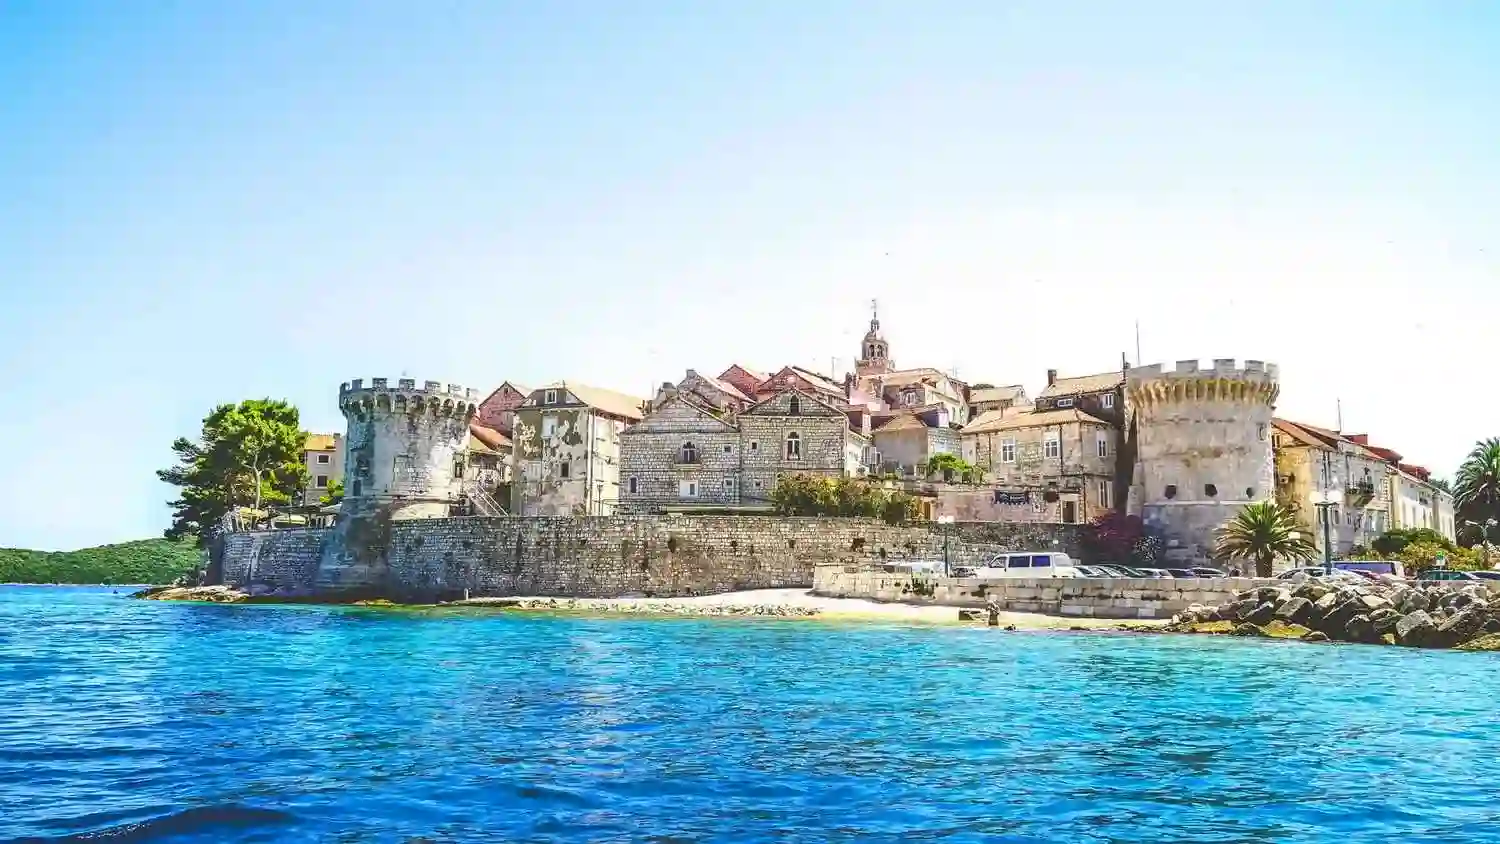 Blue sea fronts fortified walls and turrets of Korčula Island.